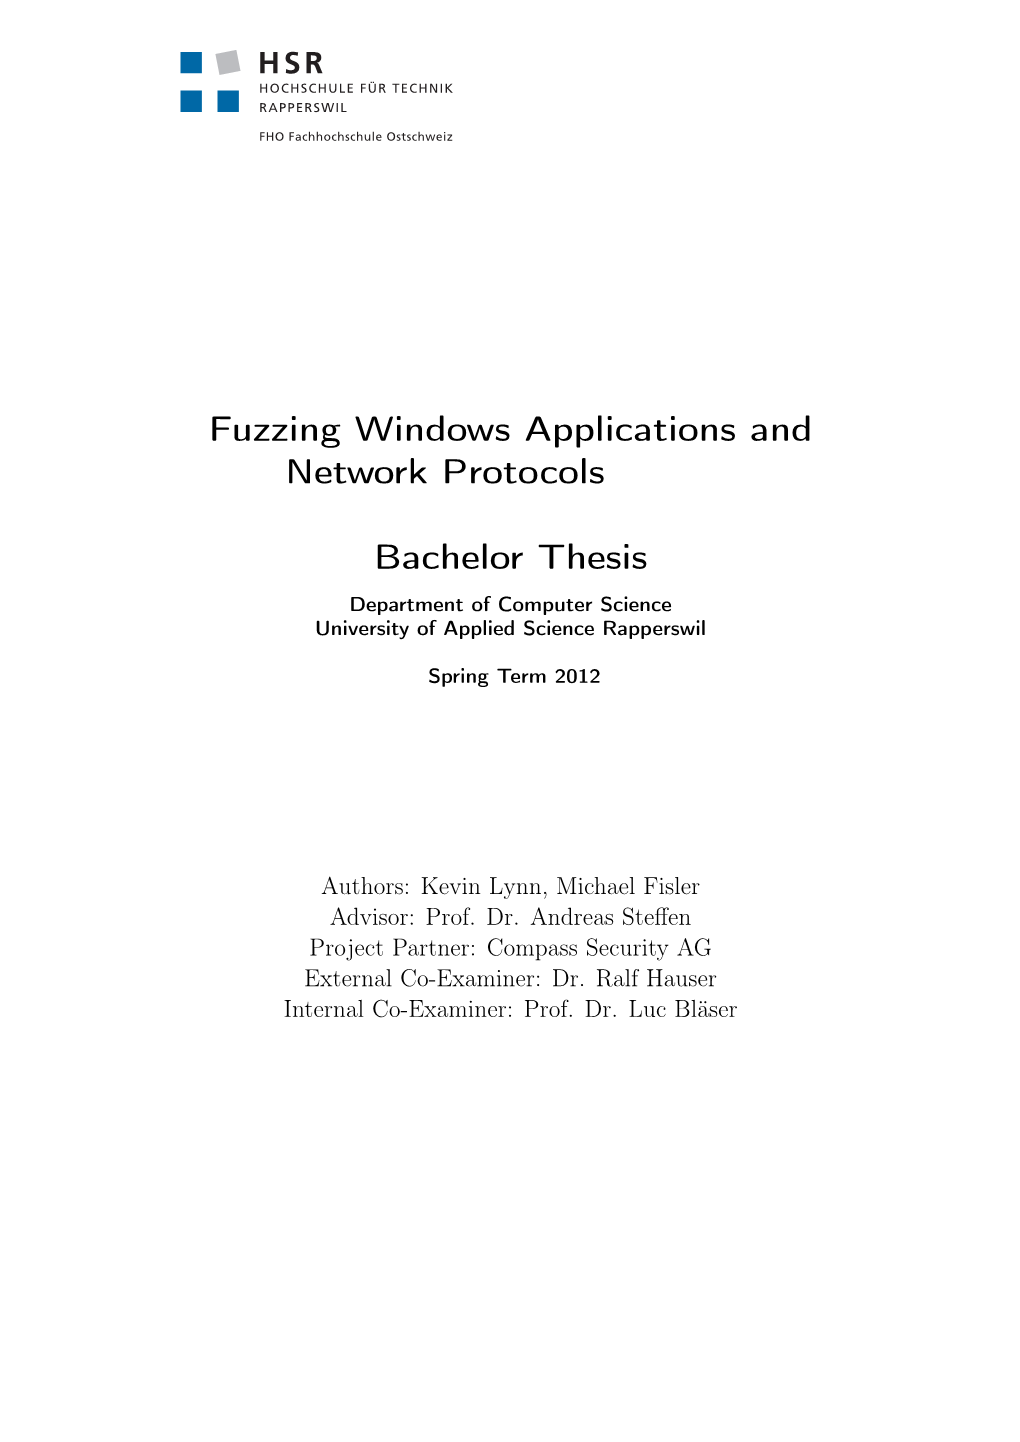 Fuzzing Windows Applications and Network Protocols Bachelor Thesis